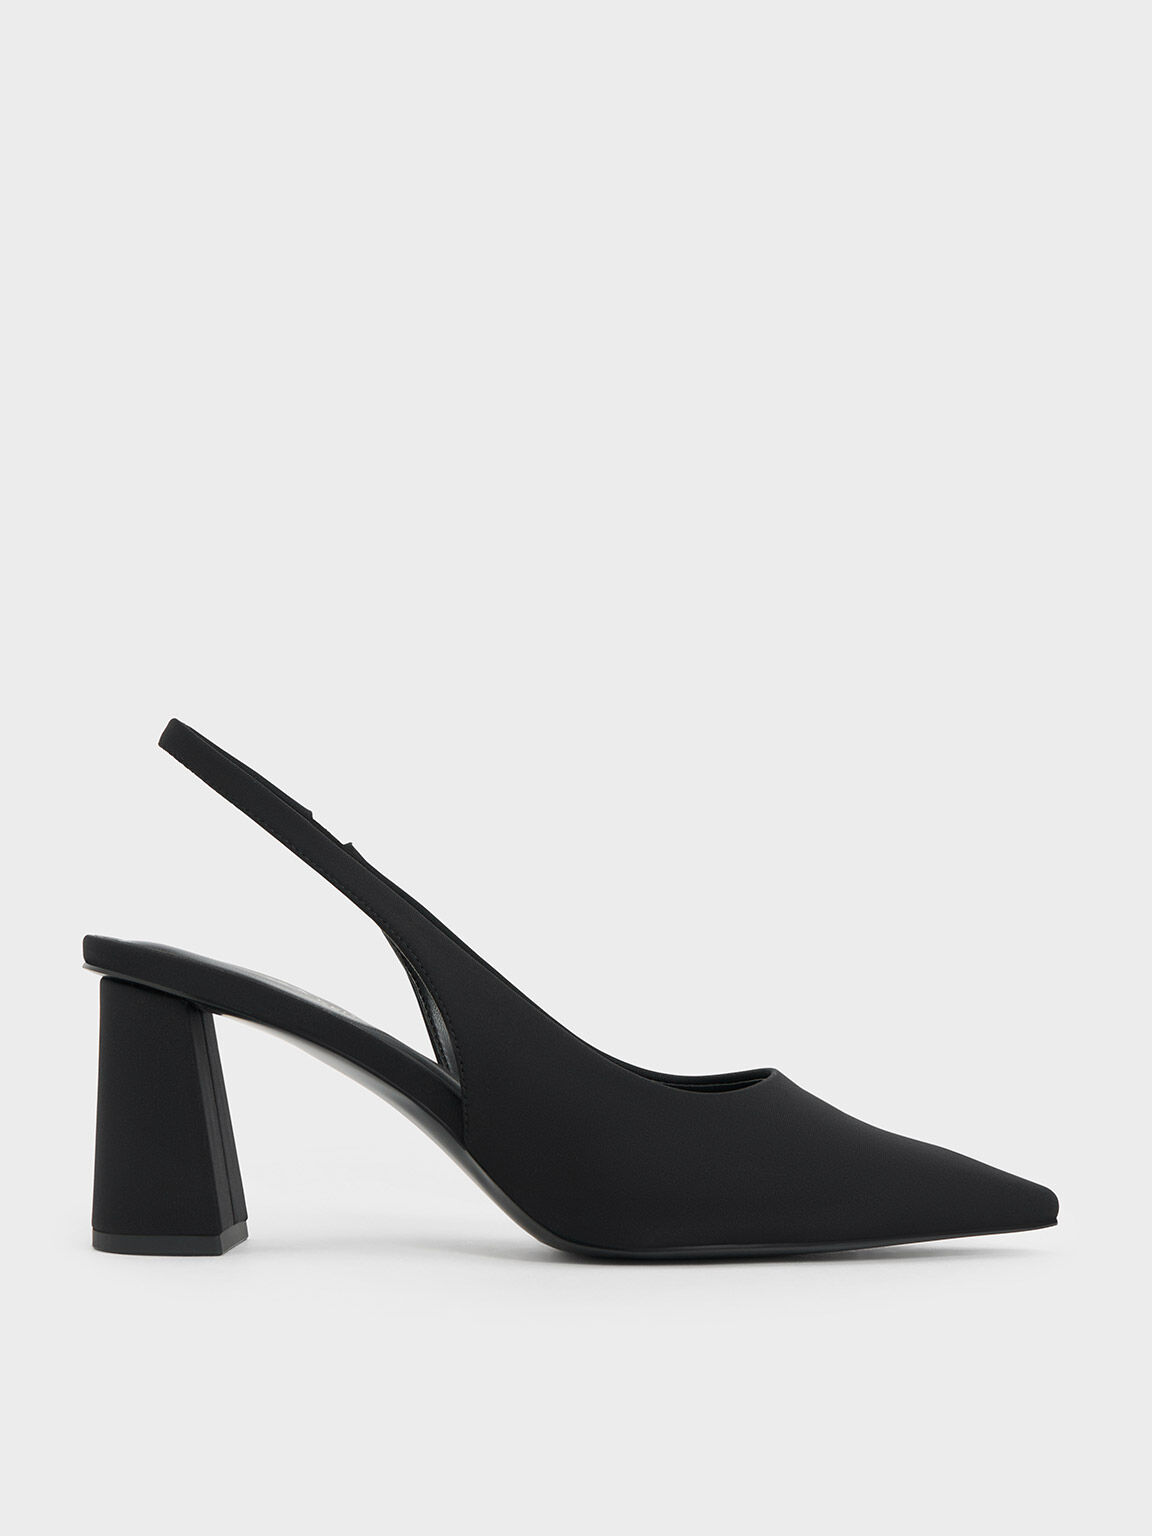 Women's Pumps | Shop Exclusive Styles | CHARLES & KEITH SG